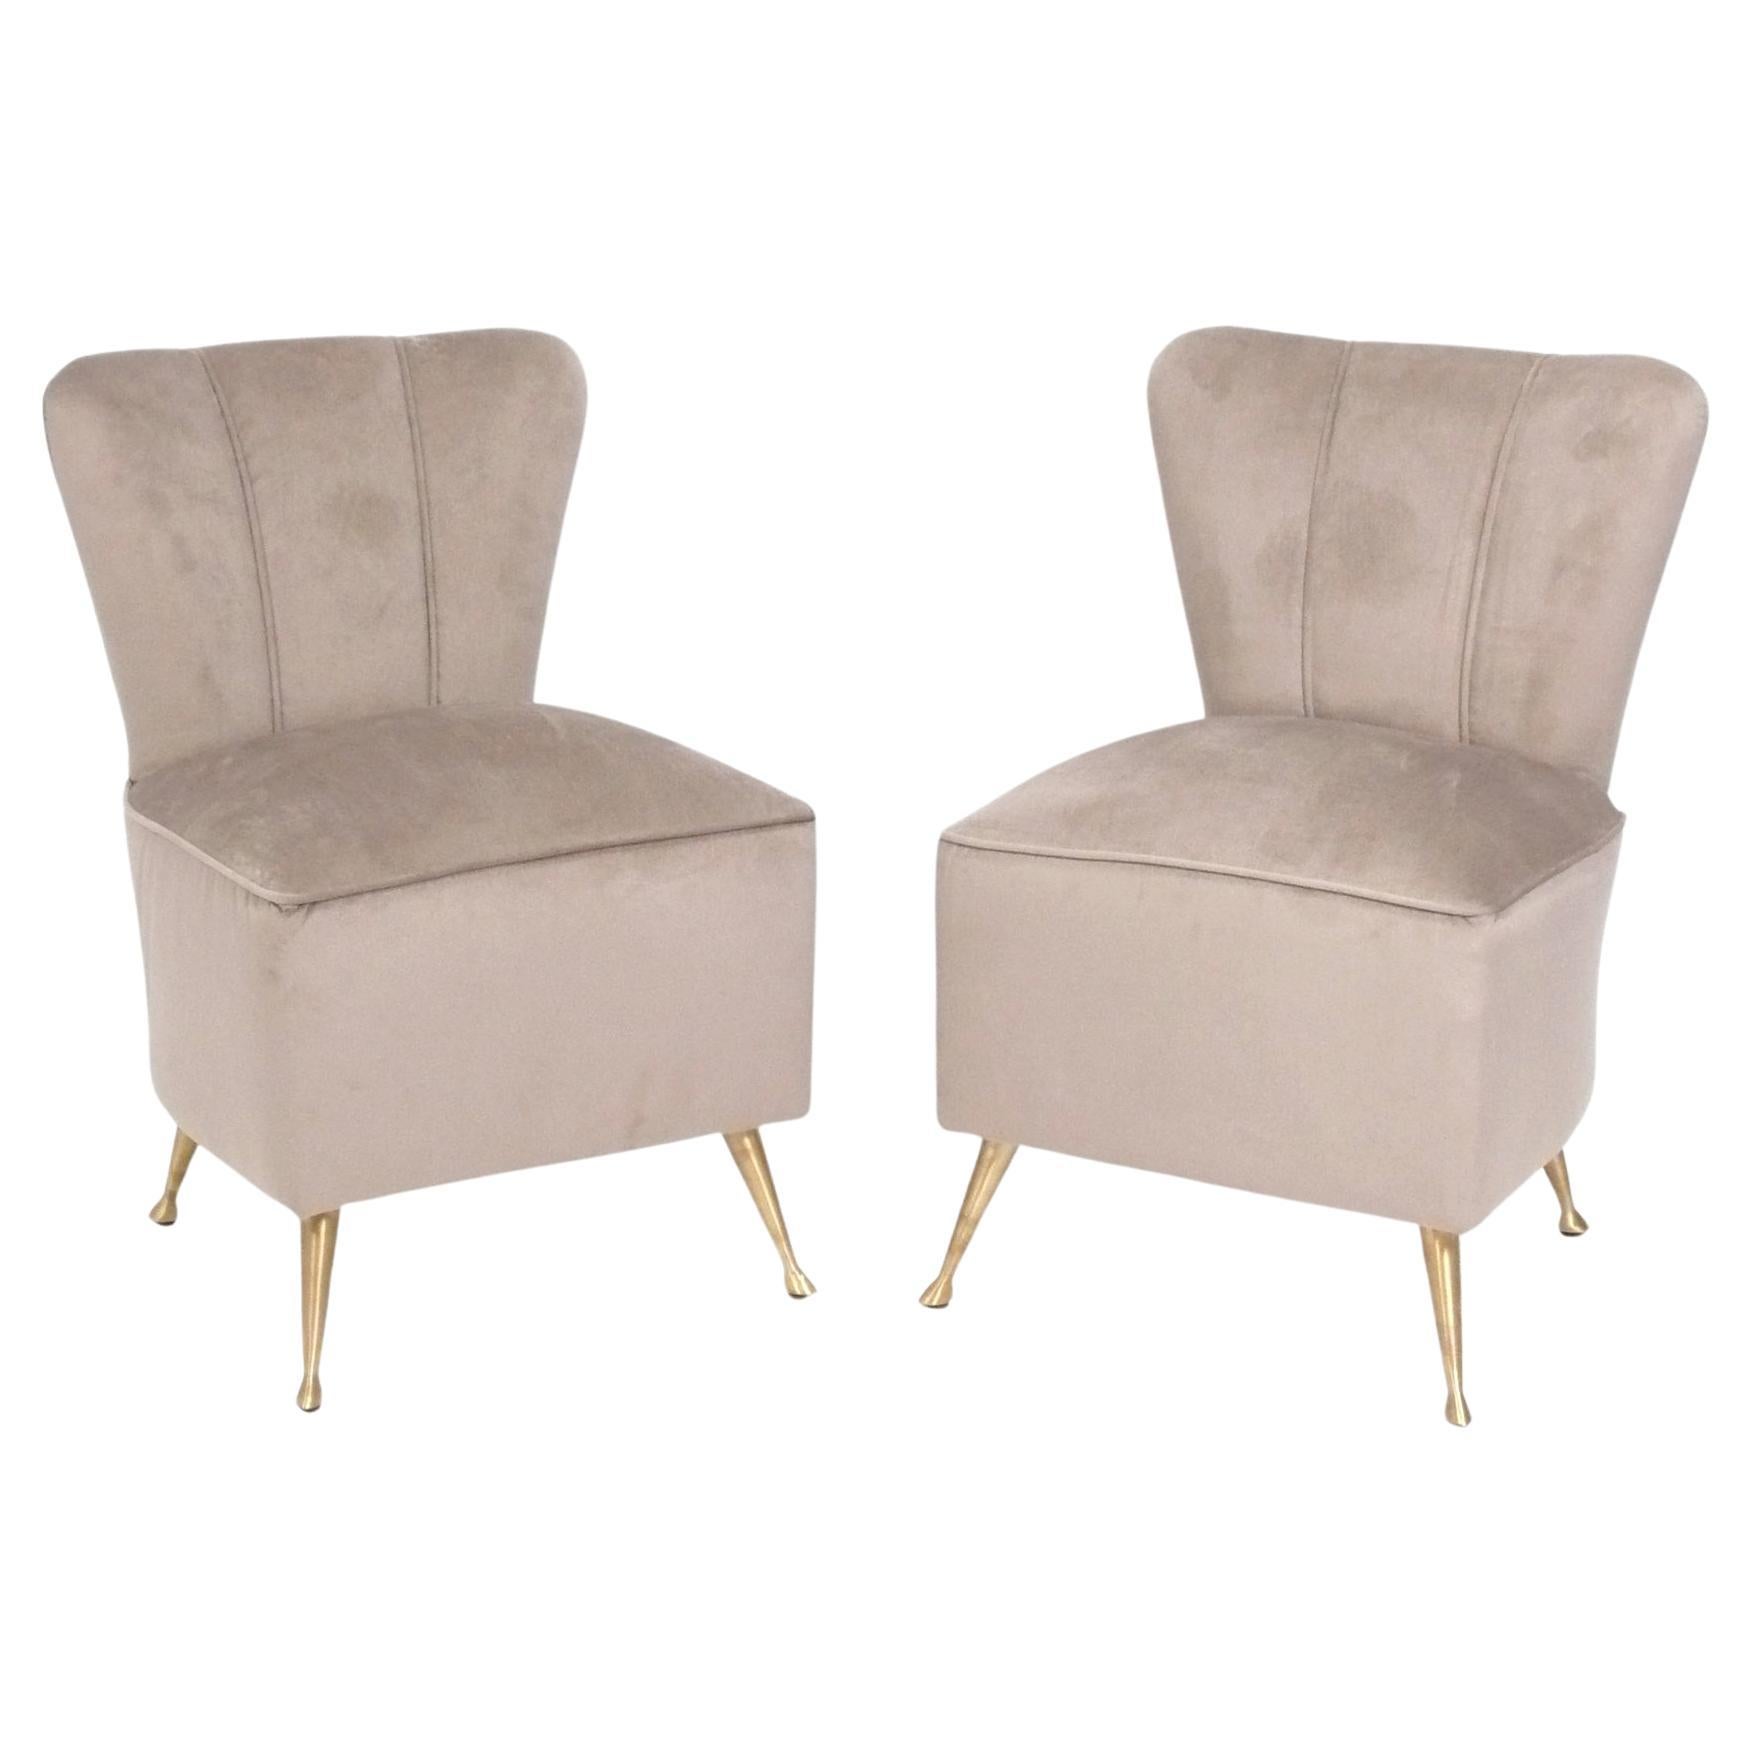 Pair of Petite Italian Slipper Chairs  For Sale